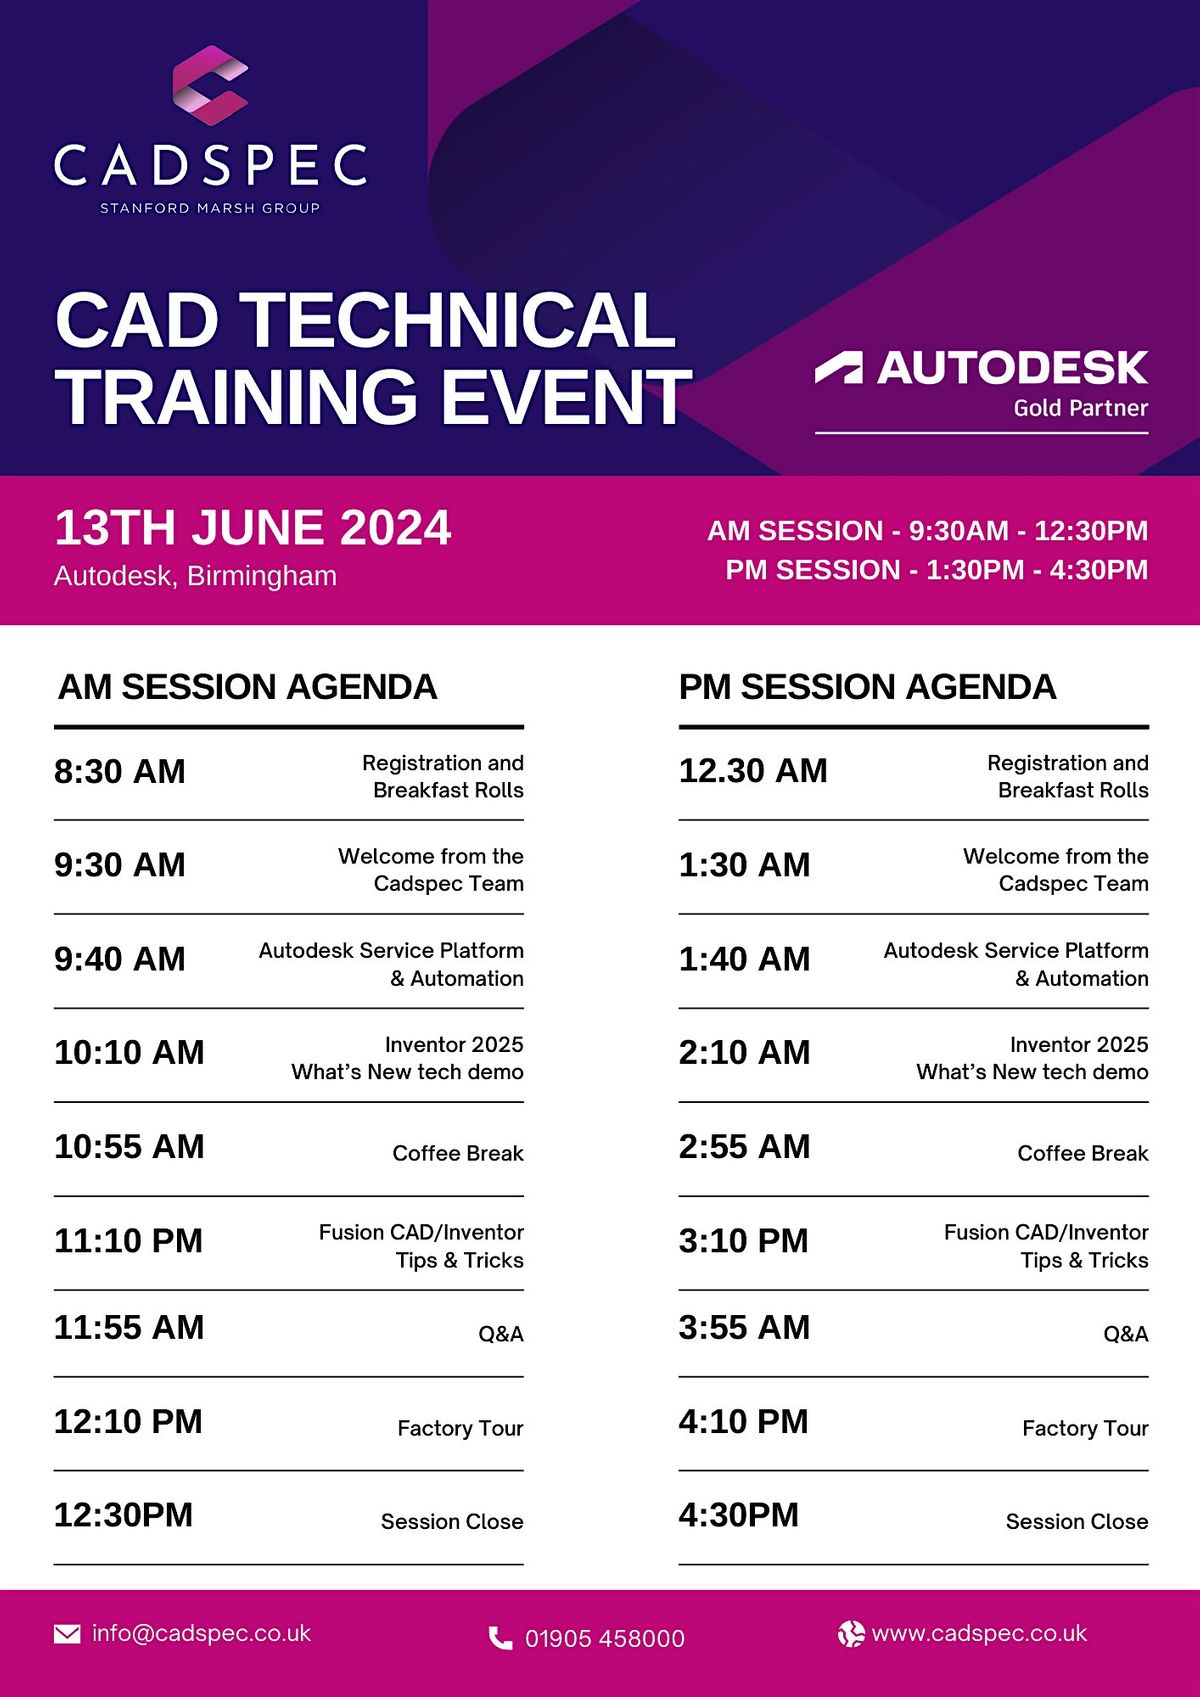 CAD technical Training Event - AM Session